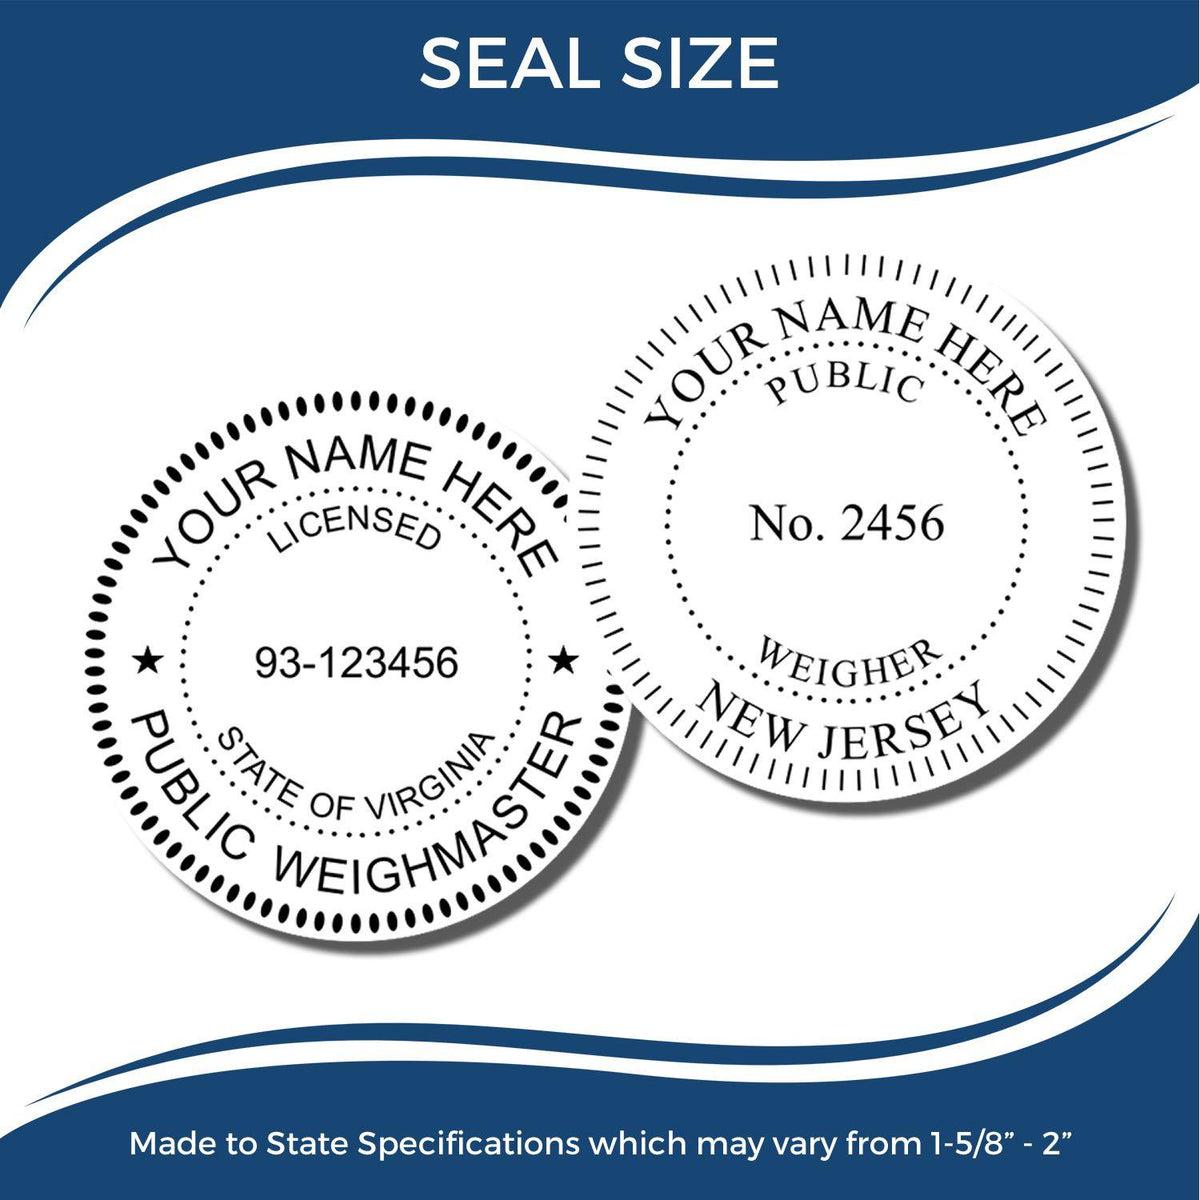 Public Weighmaster Self Inking Rubber Stamp of Seal - Engineer Seal Stamps - Stamp Type_Self-Inking, Type of Use_Professional